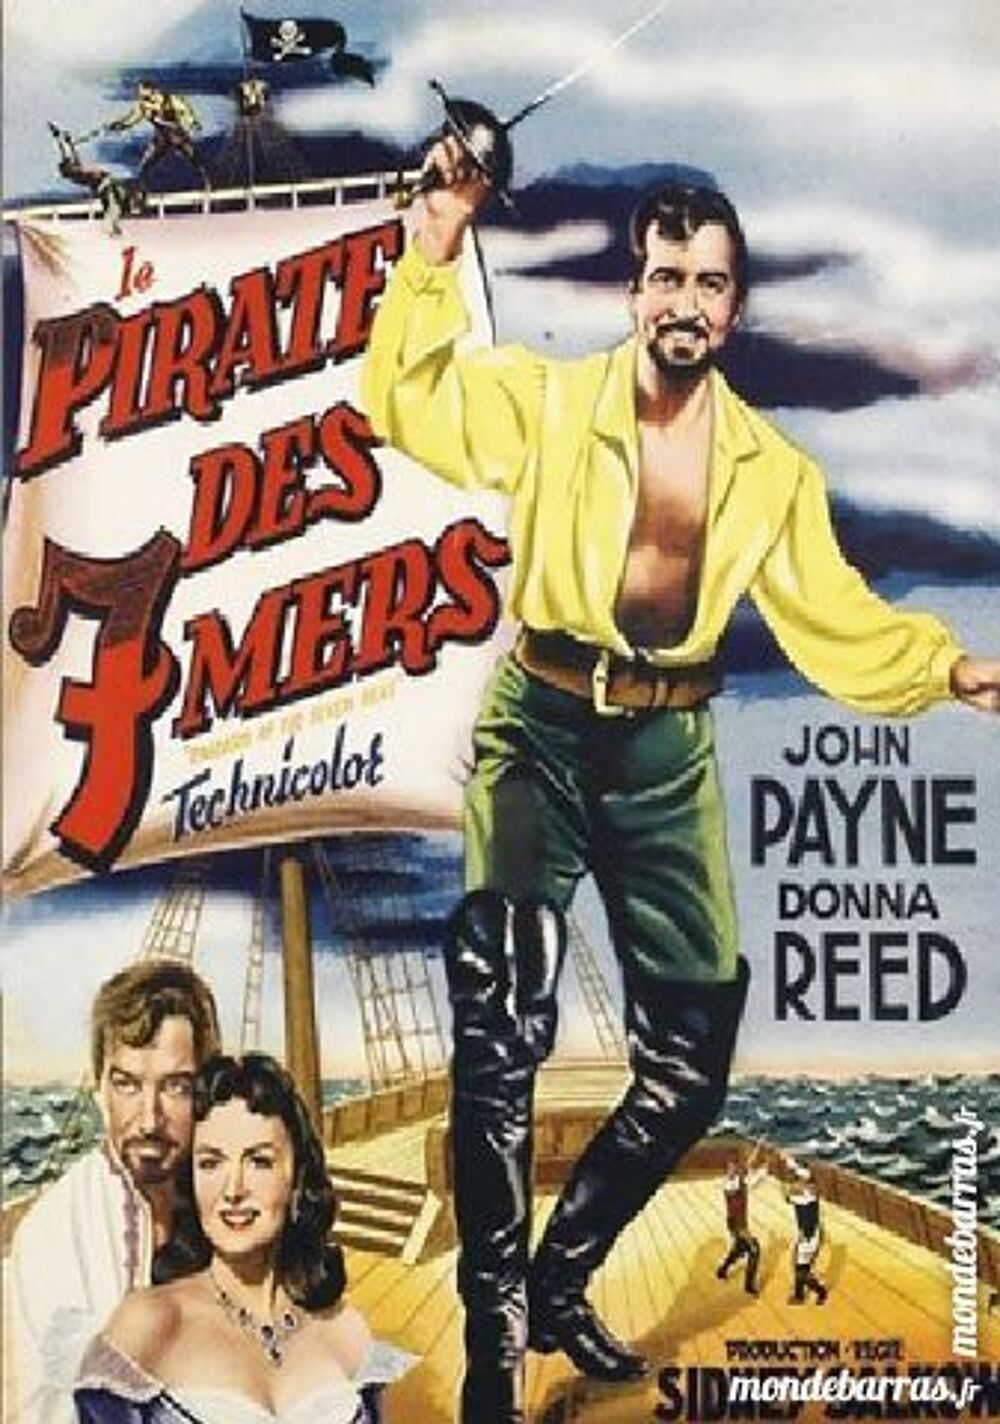 K7 Vhs: Le pirate des sept mers (351) DVD et blu-ray